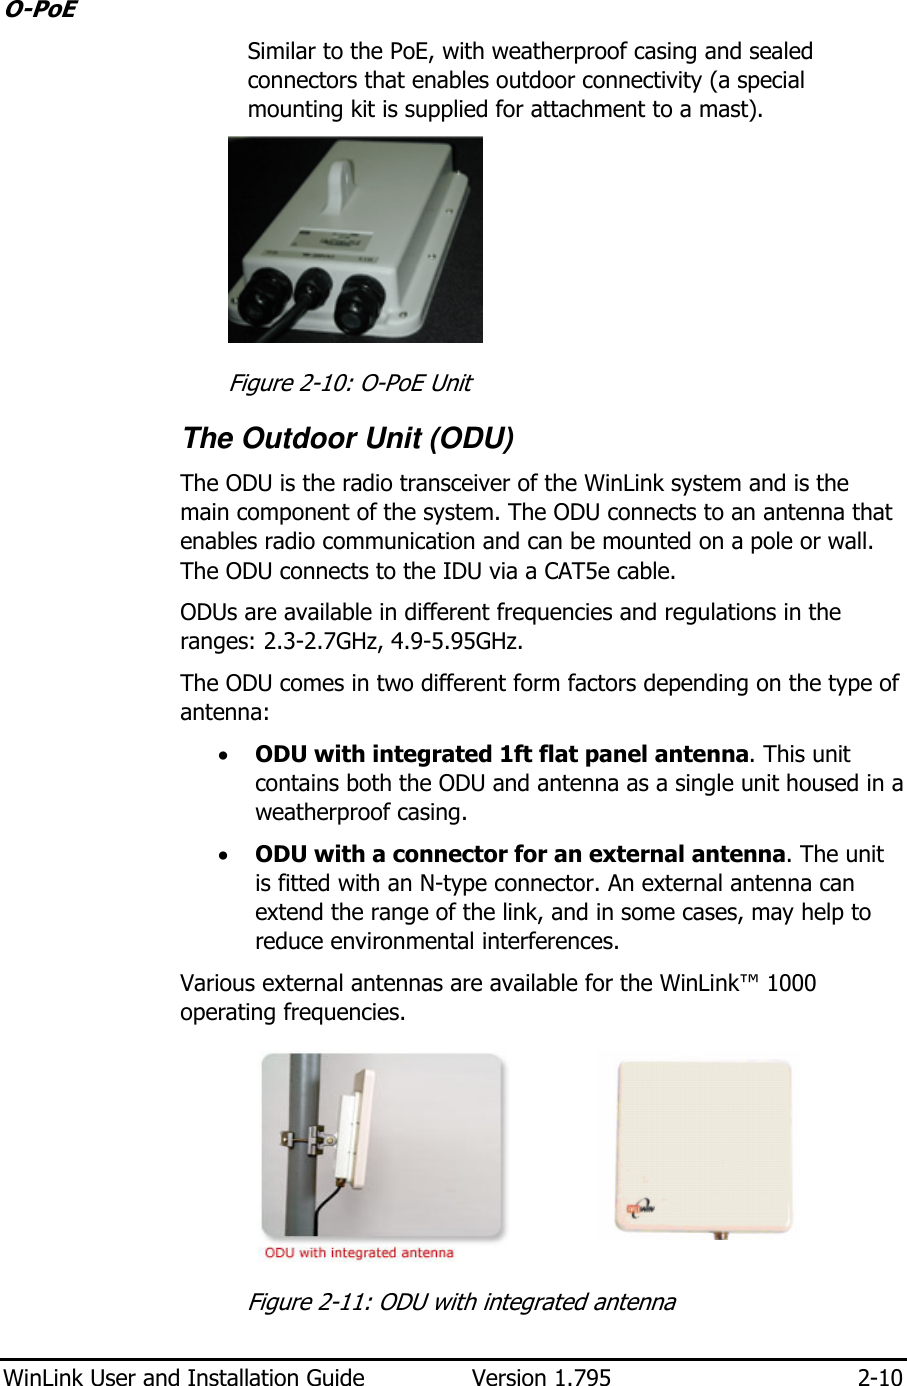  WinLink User and Installation Guide  Version 1.795  2-10  O-PoE Similar to the PoE, with weatherproof casing and sealed connectors that enables outdoor connectivity (a special mounting kit is supplied for attachment to a mast).   Figure  2-10: O-PoE Unit The Outdoor Unit (ODU) The ODU is the radio transceiver of the WinLink system and is the main component of the system. The ODU connects to an antenna that enables radio communication and can be mounted on a pole or wall. The ODU connects to the IDU via a CAT5e cable. ODUs are available in different frequencies and regulations in the ranges: 2.3-2.7GHz, 4.9-5.95GHz. The ODU comes in two different form factors depending on the type of antenna: • ODU with integrated 1ft flat panel antenna. This unit contains both the ODU and antenna as a single unit housed in a weatherproof casing. • ODU with a connector for an external antenna. The unit is fitted with an N-type connector. An external antenna can extend the range of the link, and in some cases, may help to reduce environmental interferences.  Various external antennas are available for the WinLink™ 1000 operating frequencies.    Figure  2-11: ODU with integrated antenna 